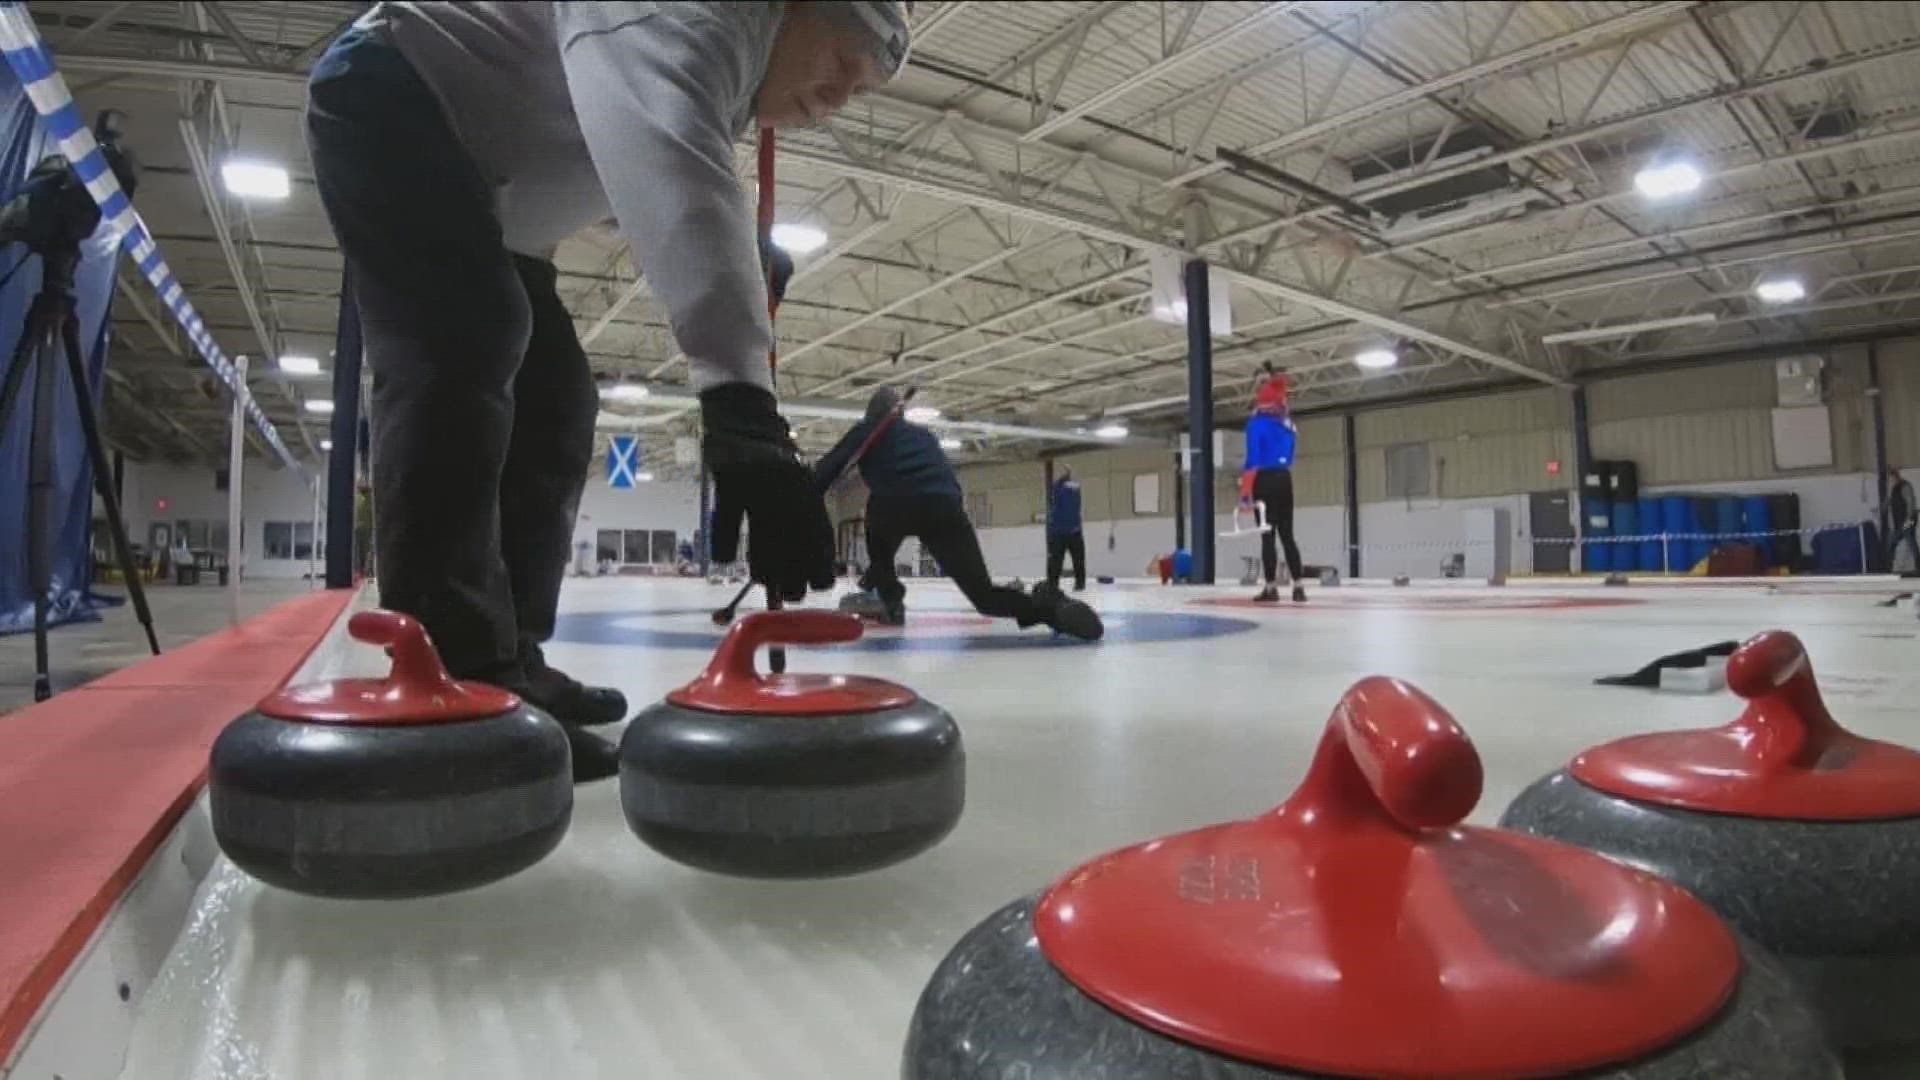 The VA already had several recreation therapy programs, but the number of vets seeking recreational therapy was growing, so they turned to winter sports.